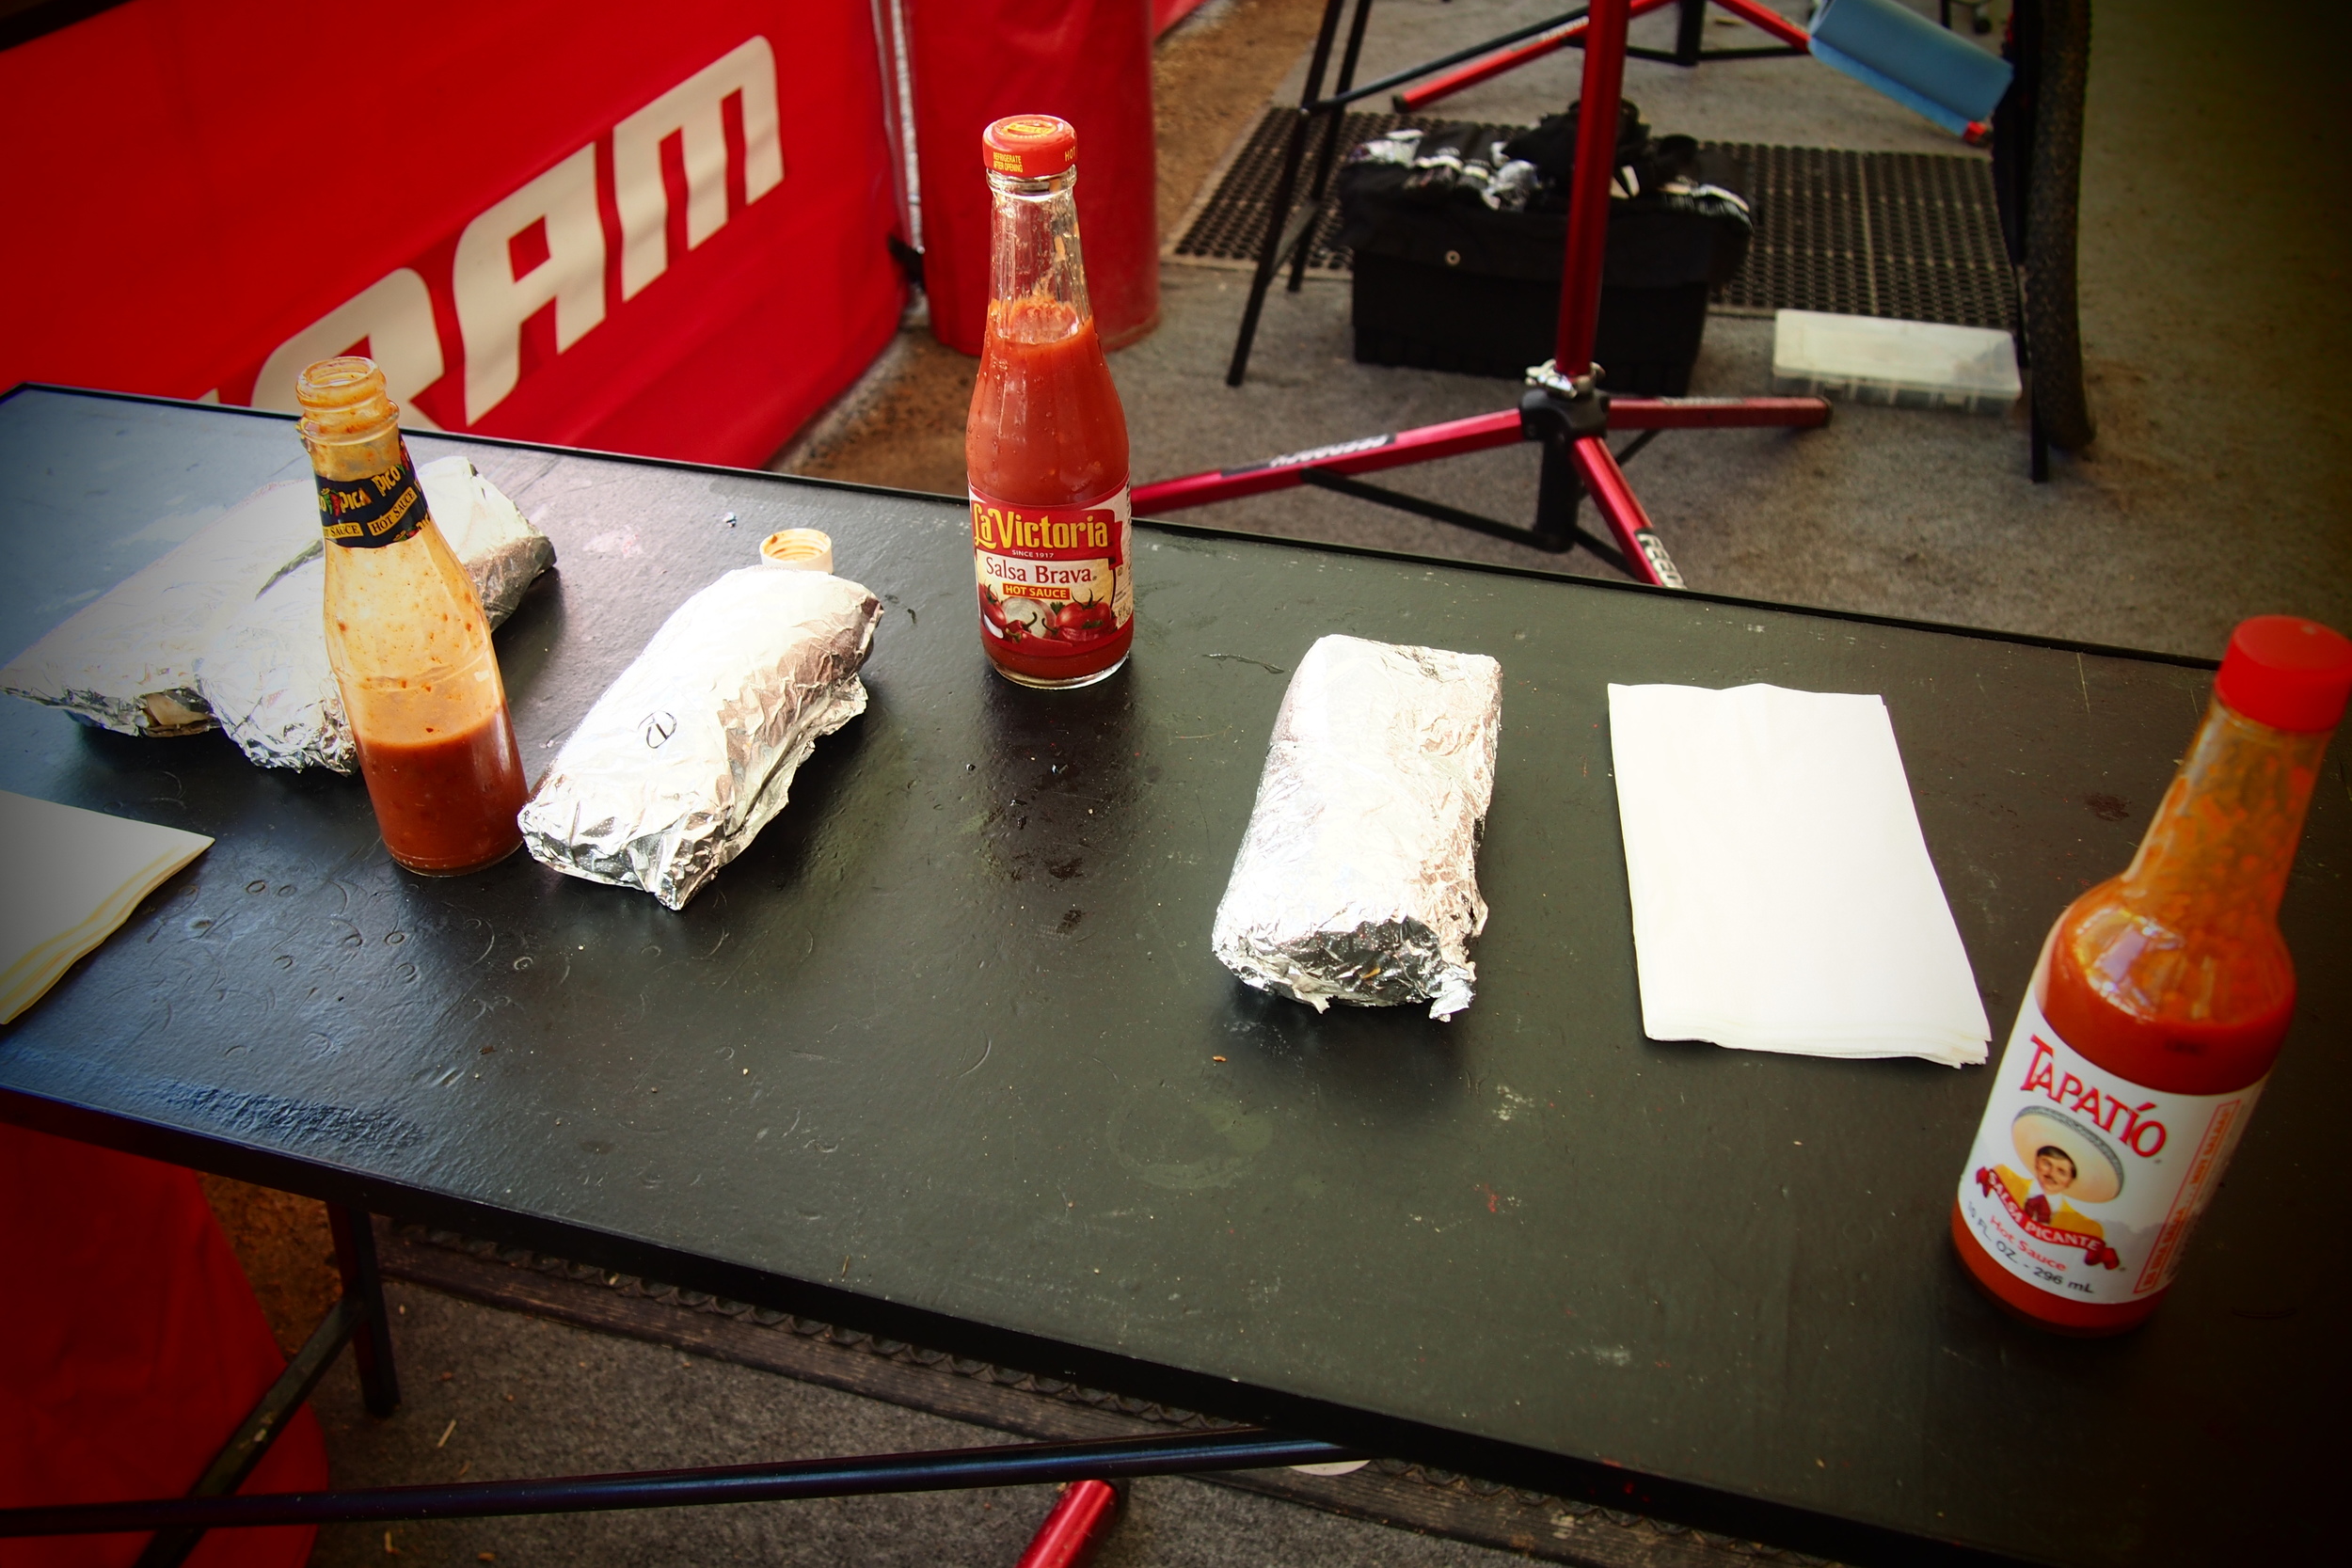 Burrito's & Hot sauce in the pits.